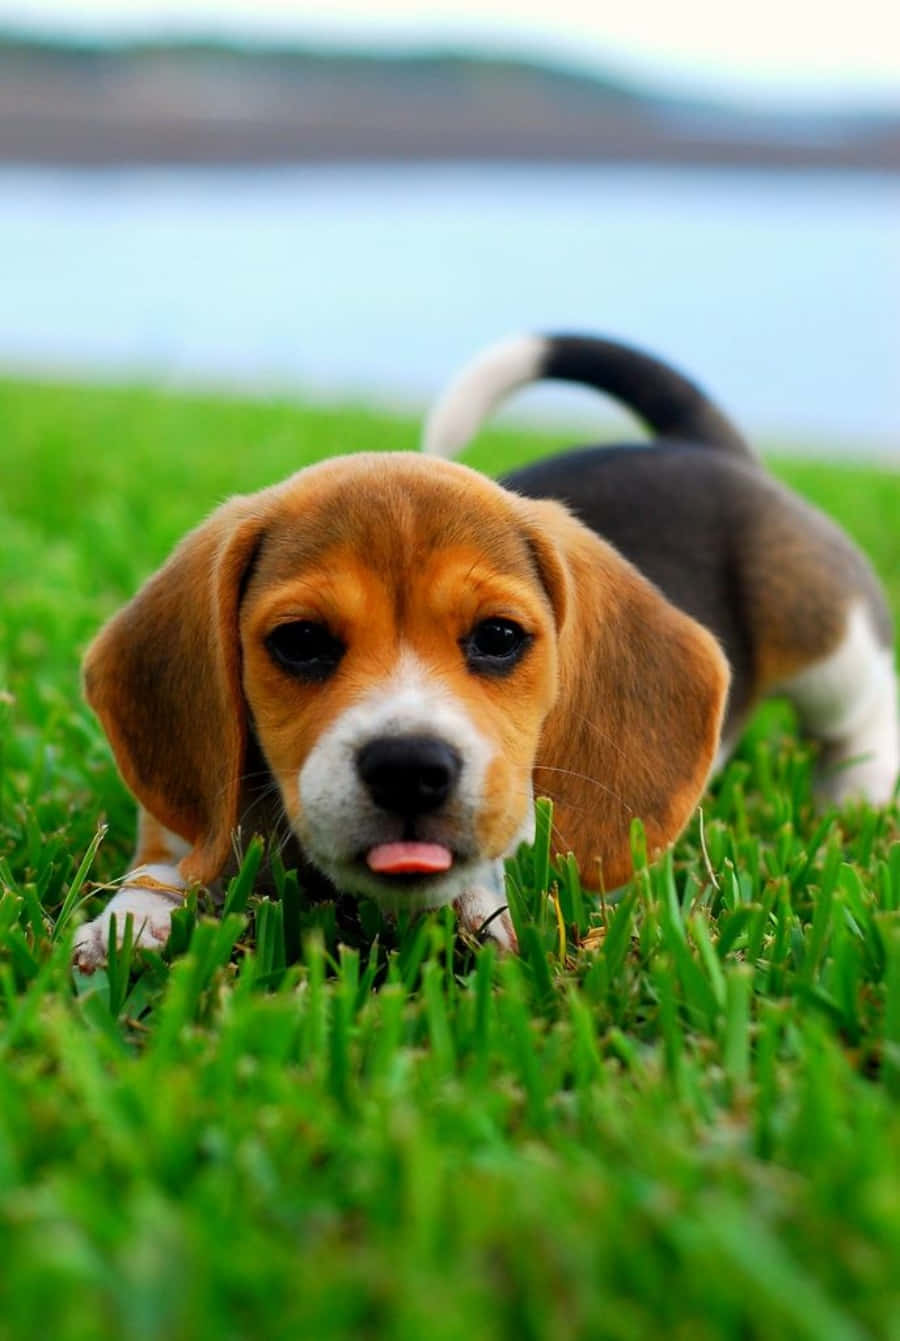 Adorable Beagle pup with big floppy ears